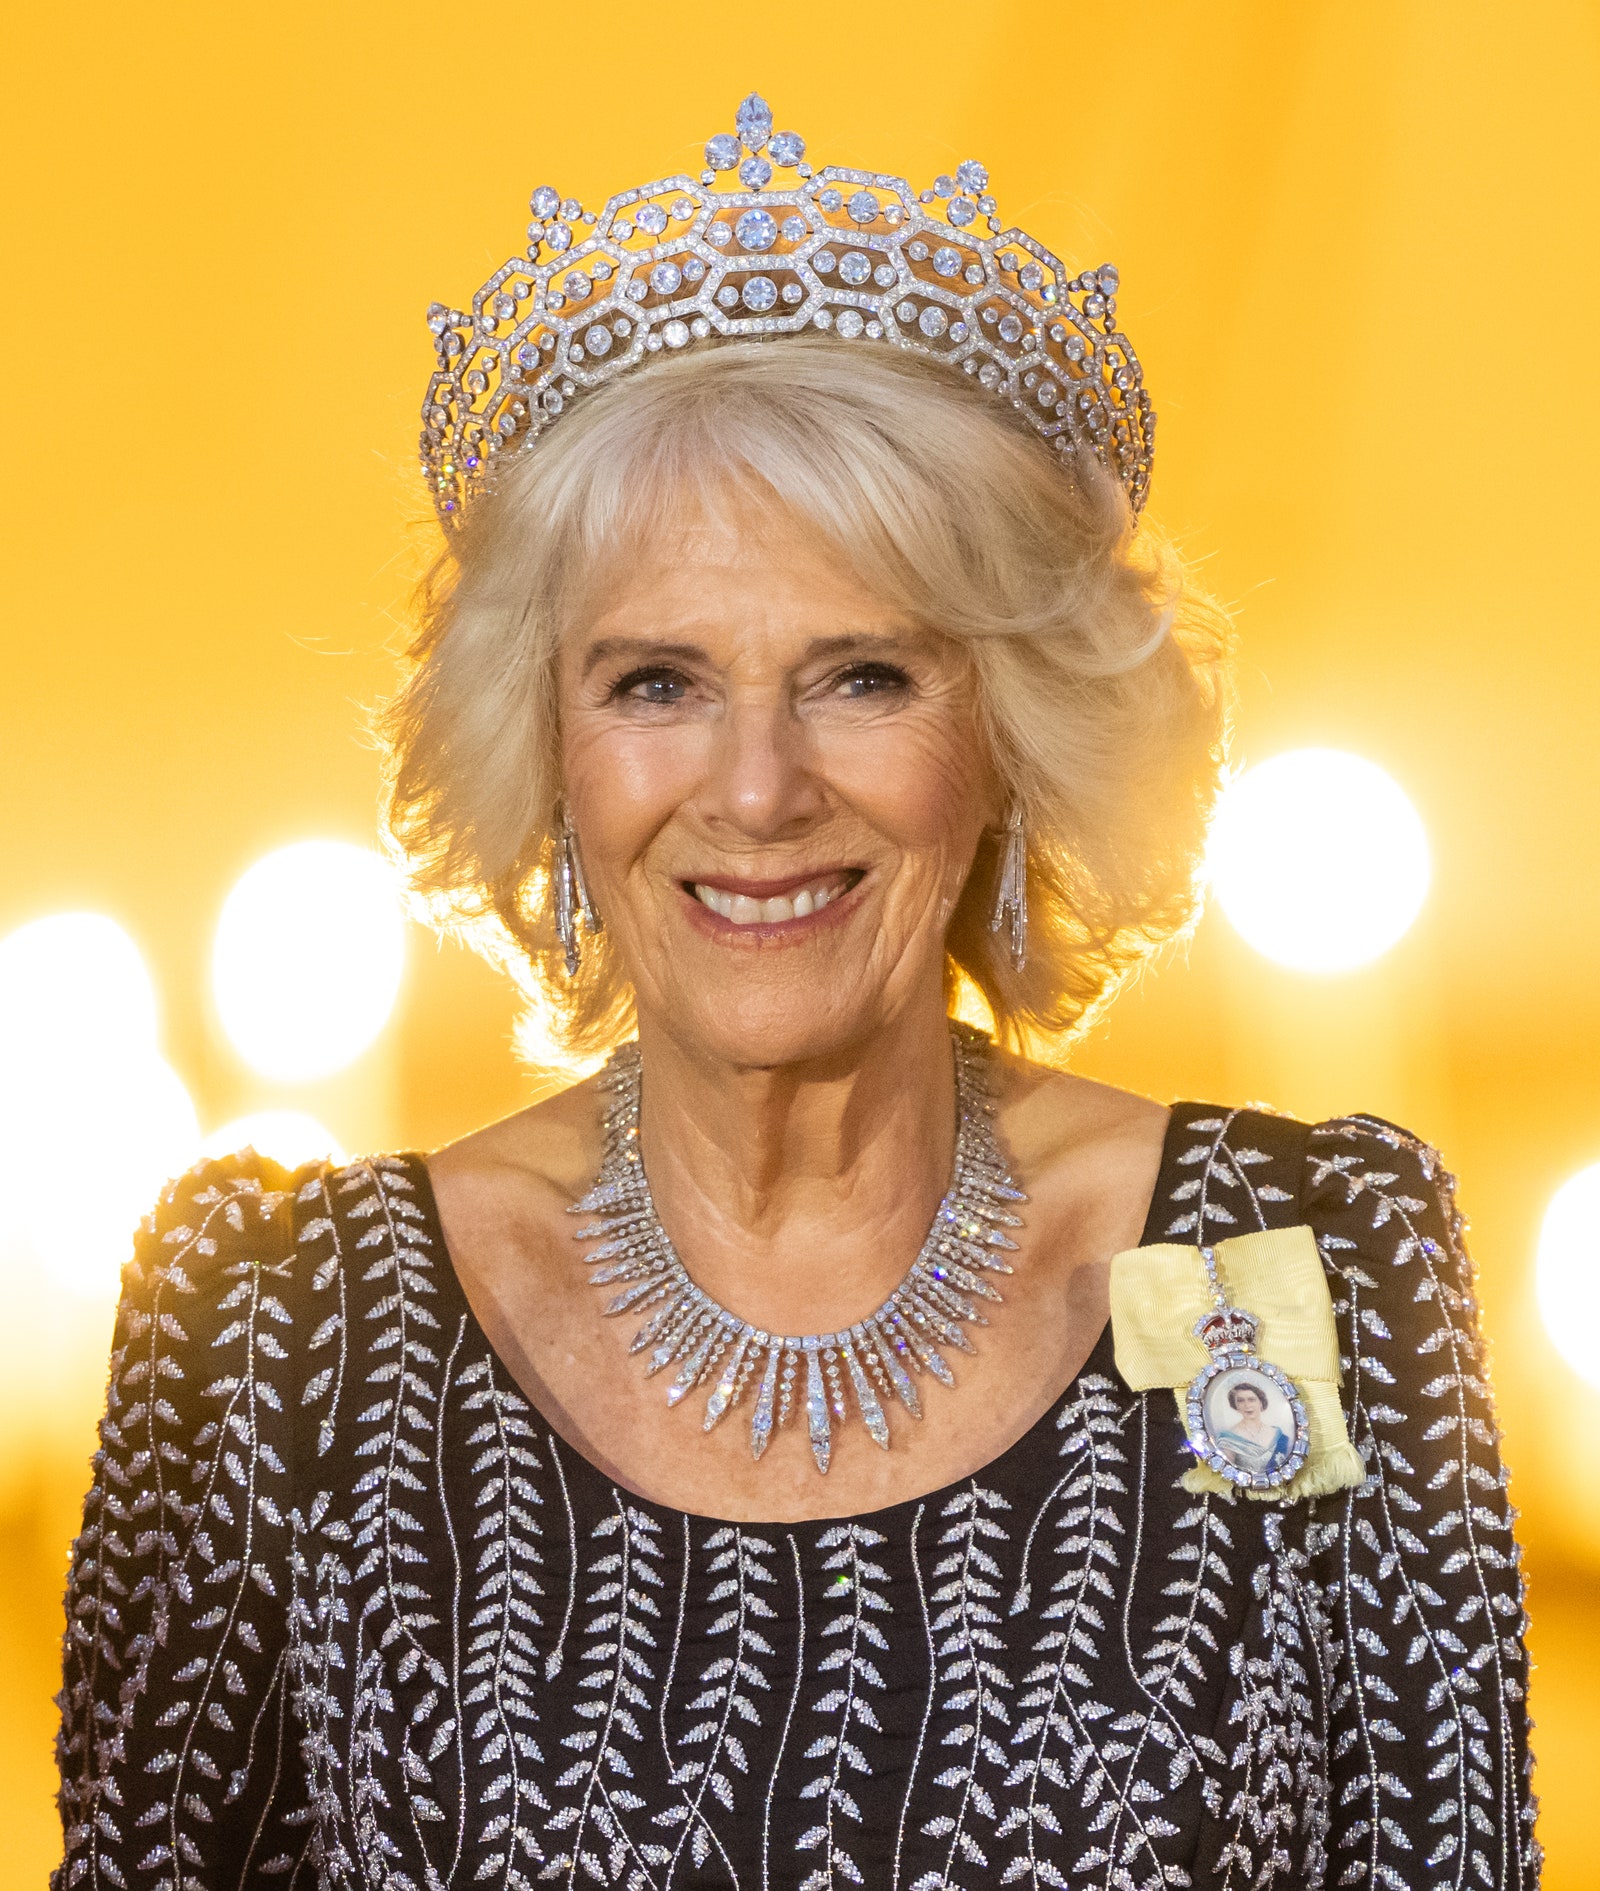 Queen Camilla in the Greville Tiara tiara for the state banquet in Germany March 2023